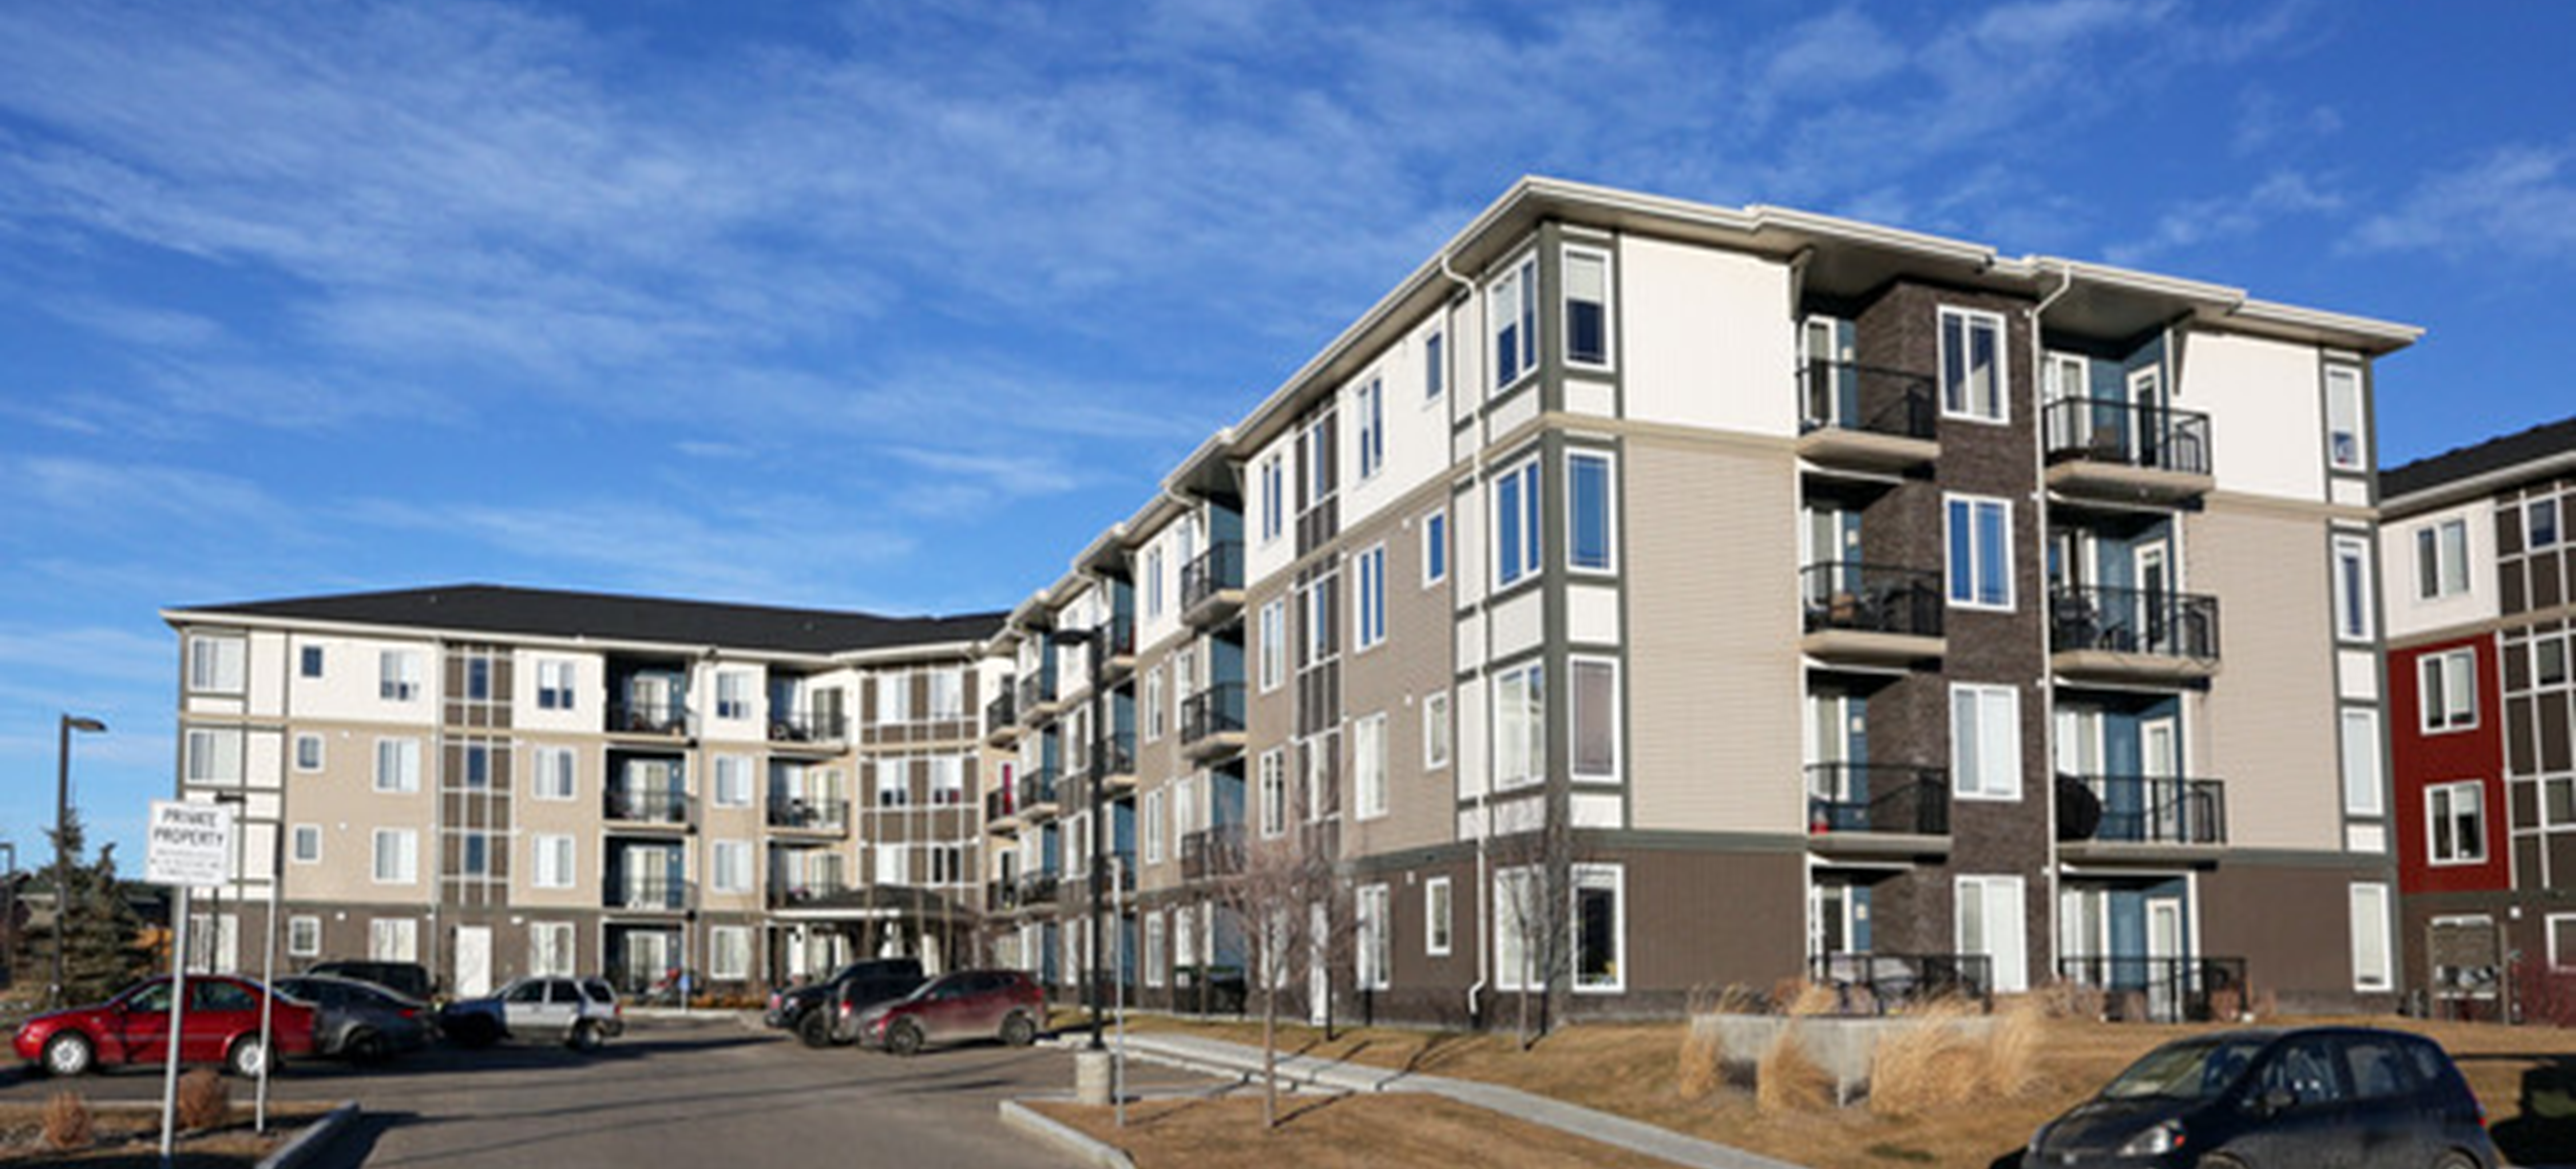 Airdrie place